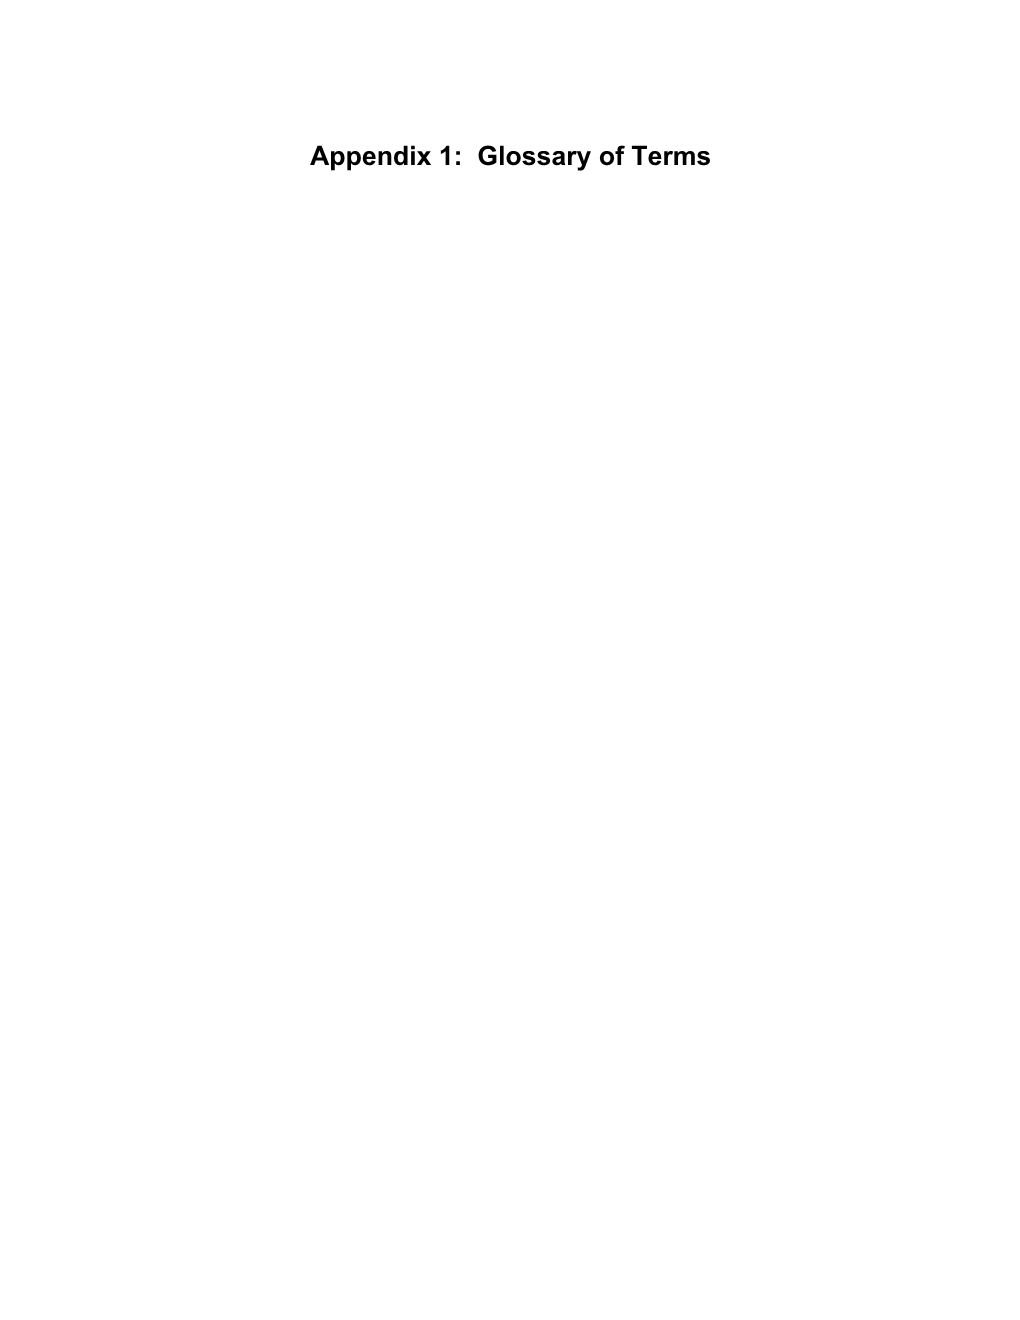 Appendix 1: Glossary of Terms